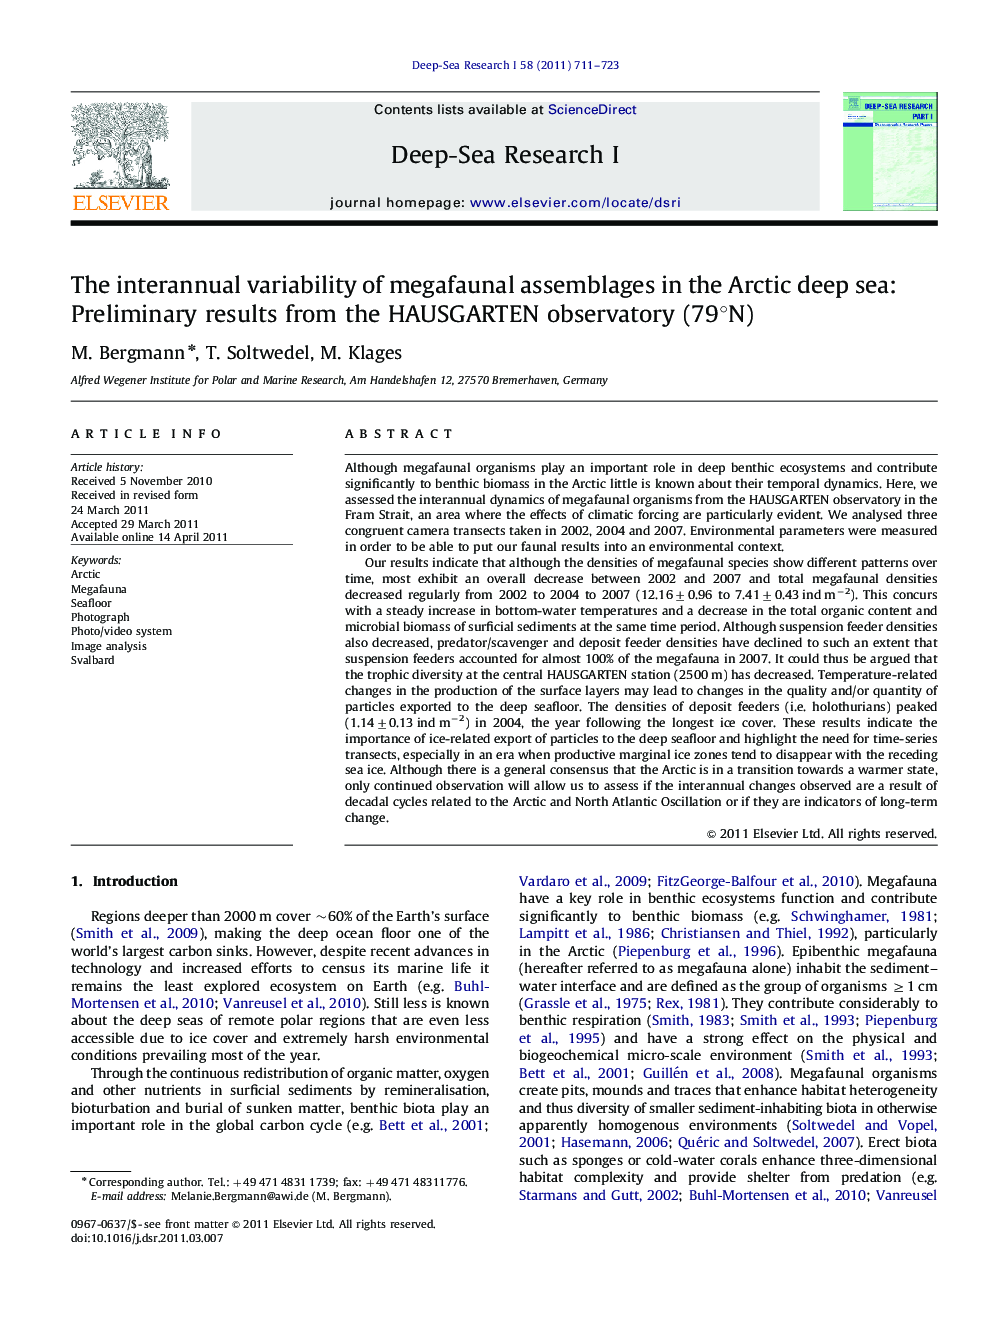 The interannual variability of megafaunal assemblages in the Arctic deep sea: Preliminary results from the HAUSGARTEN observatory (79°N)